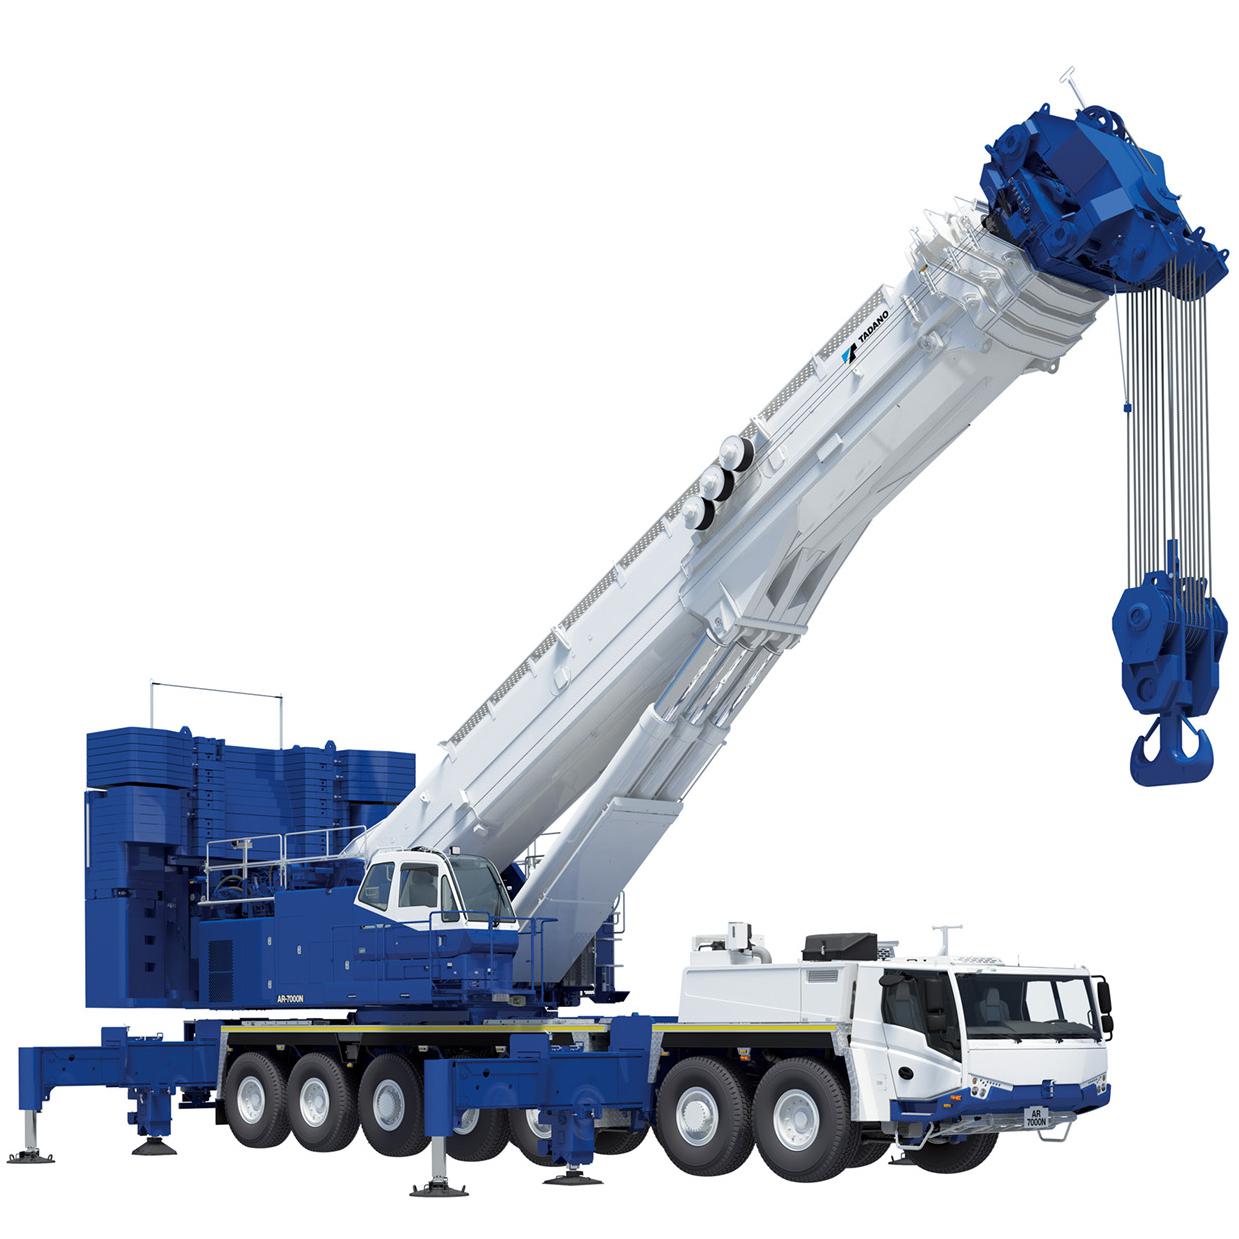 Tadano Launches the AR-7000N, the Highest Lifting Capacity All-Terrain Crane from a Japanese Manufacturer